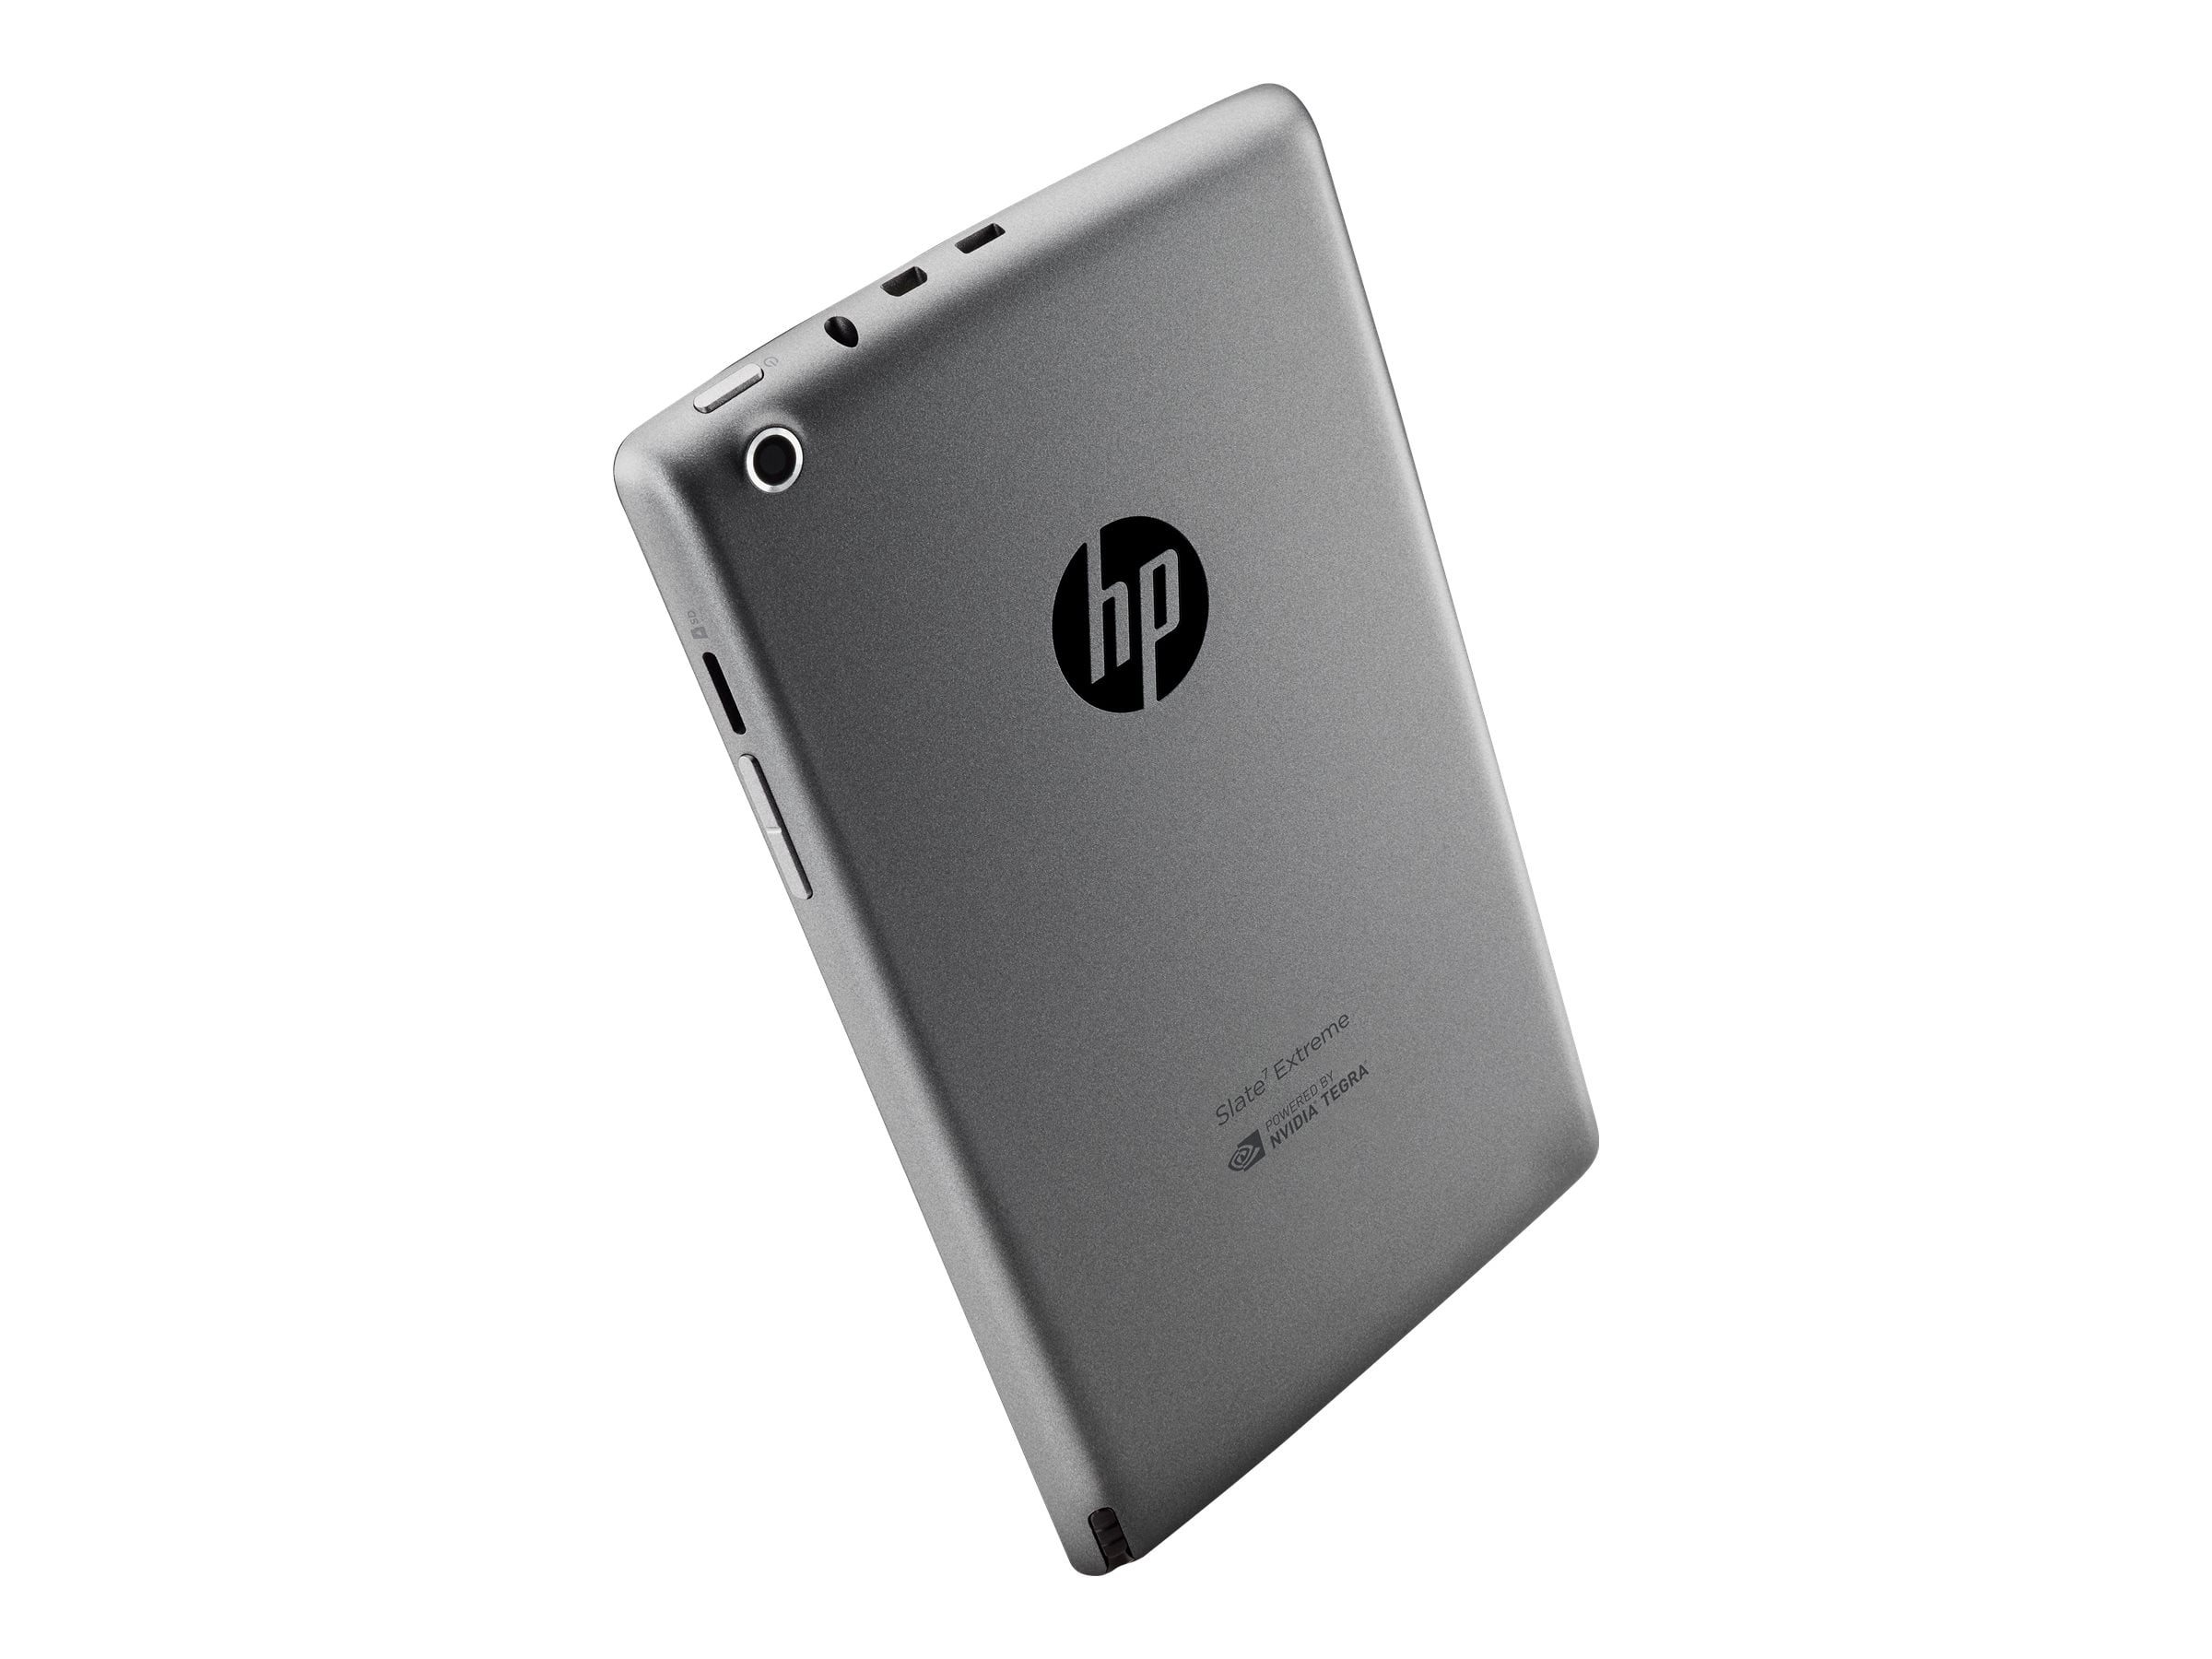 HP Slate 7 Extreme - Tablet - Android 4.2.2 (Jelly Bean) - 16 GB